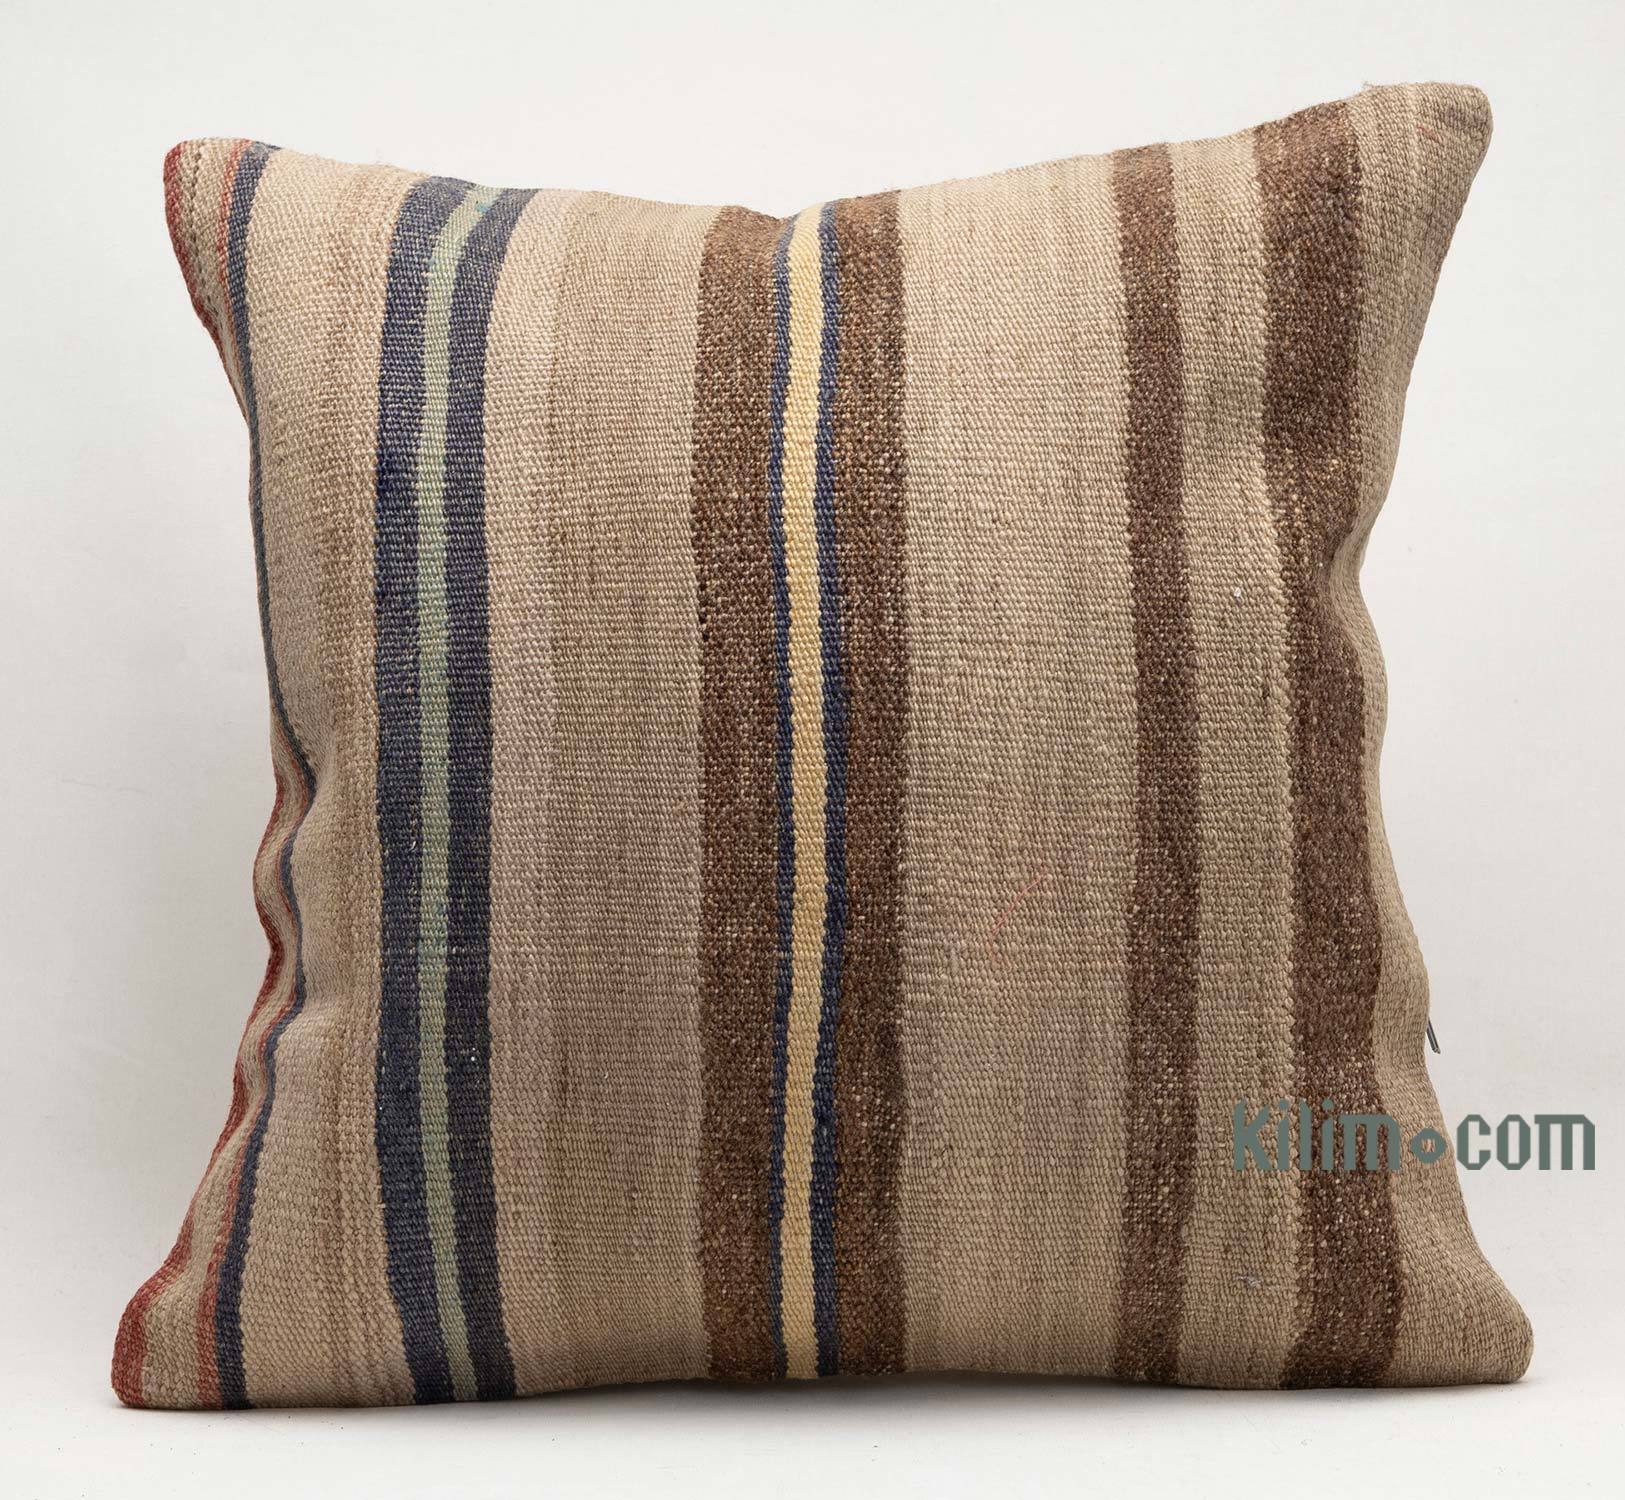 Buy The Latest Styles 45.00 usd for Cotton Kilim Pillow Cover Find your  favorite styles and products